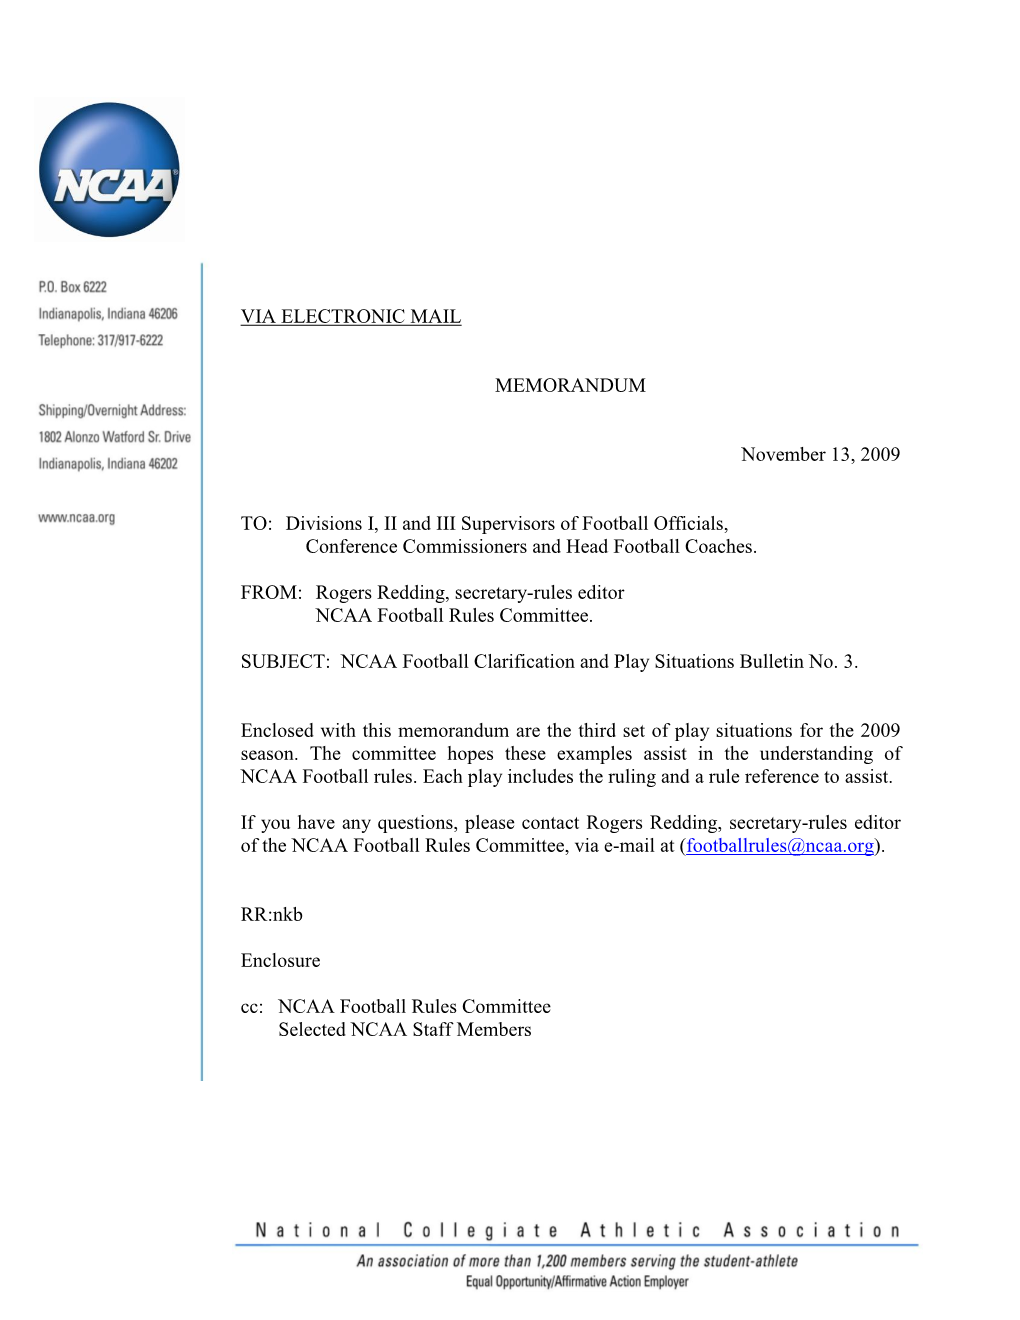 VIA ELECTRONIC MAIL MEMORANDUM November 13, 2009 TO: Divisions I, II and III Supervisors of Football Officials, Conference Comm